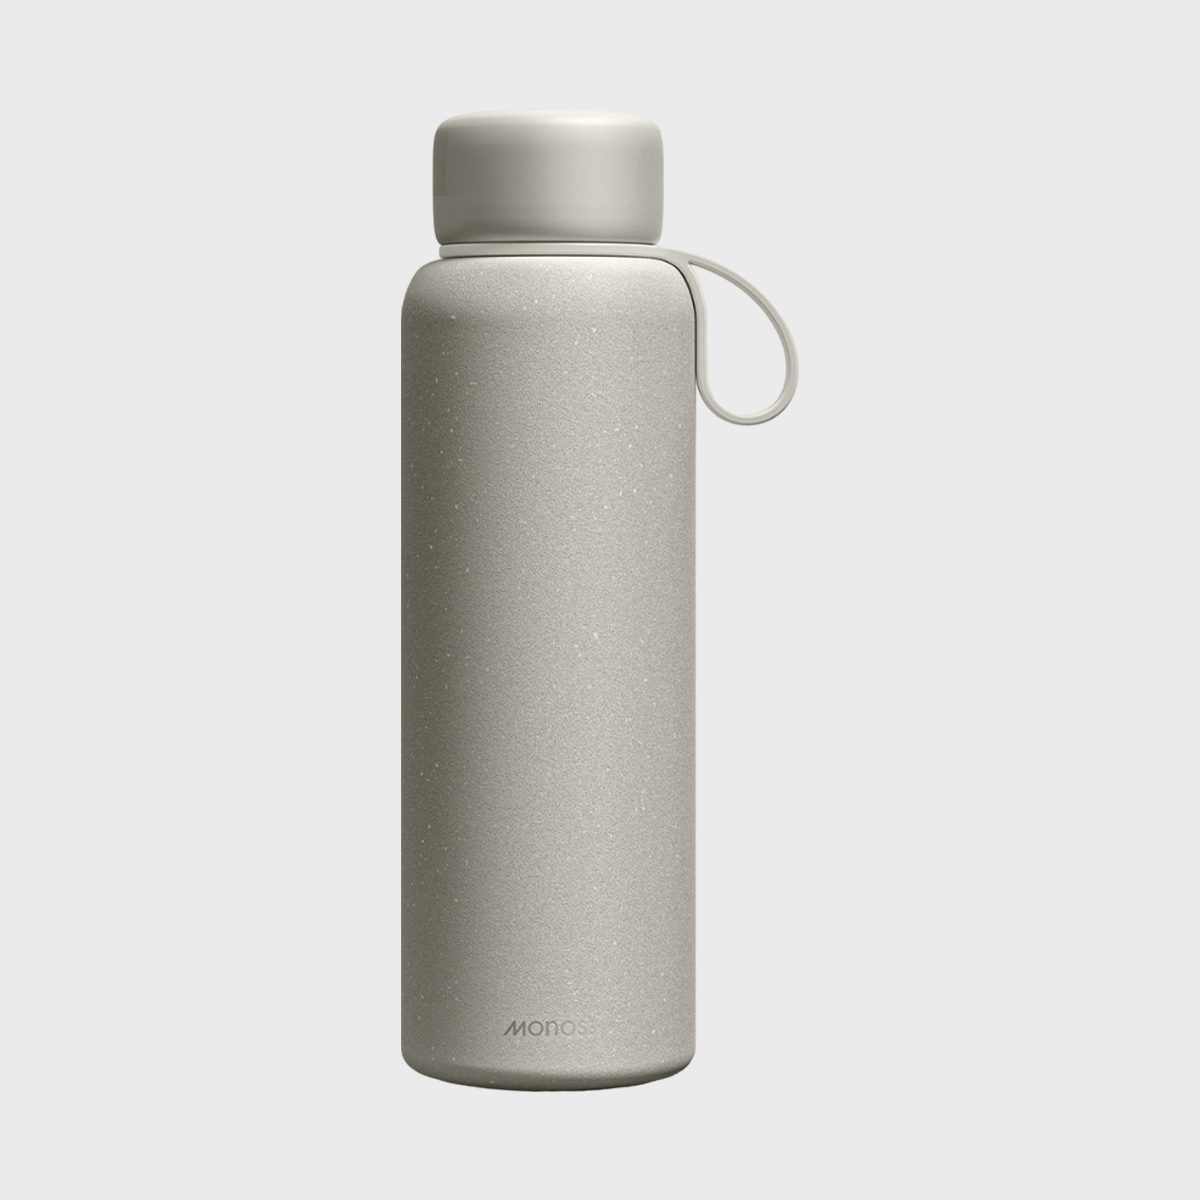 <p>It's wise to bring a <a href="https://www.rd.com/list/smart-water-bottles/">water bottle</a> along on any off-ship excursions, as they are often three to eight hours long and require some physical activity that could leave anyone parched. But refilling in random fountains or sinks when you aren't sure if the water is safe to drink can be a mistake—and that's the whole reason I'm obsessed with this <a href="https://monos.com/products/kiyo-uvc-water-bottle?variant=42858242310343" rel="noopener">Kiyo UVC water bottle</a>, which purifies my water instantly. It kills 99.99% of bacteria and other pathogens in 60 seconds (there's a three-minute cycle for a deeper clean too) and comes in two sizes.</p> <p class="listicle-page__cta-button-shop"><a class="shop-btn" href="https://monos.com/products/kiyo-uvc-water-bottle?variant=42858242310343">Shop Now</a></p>